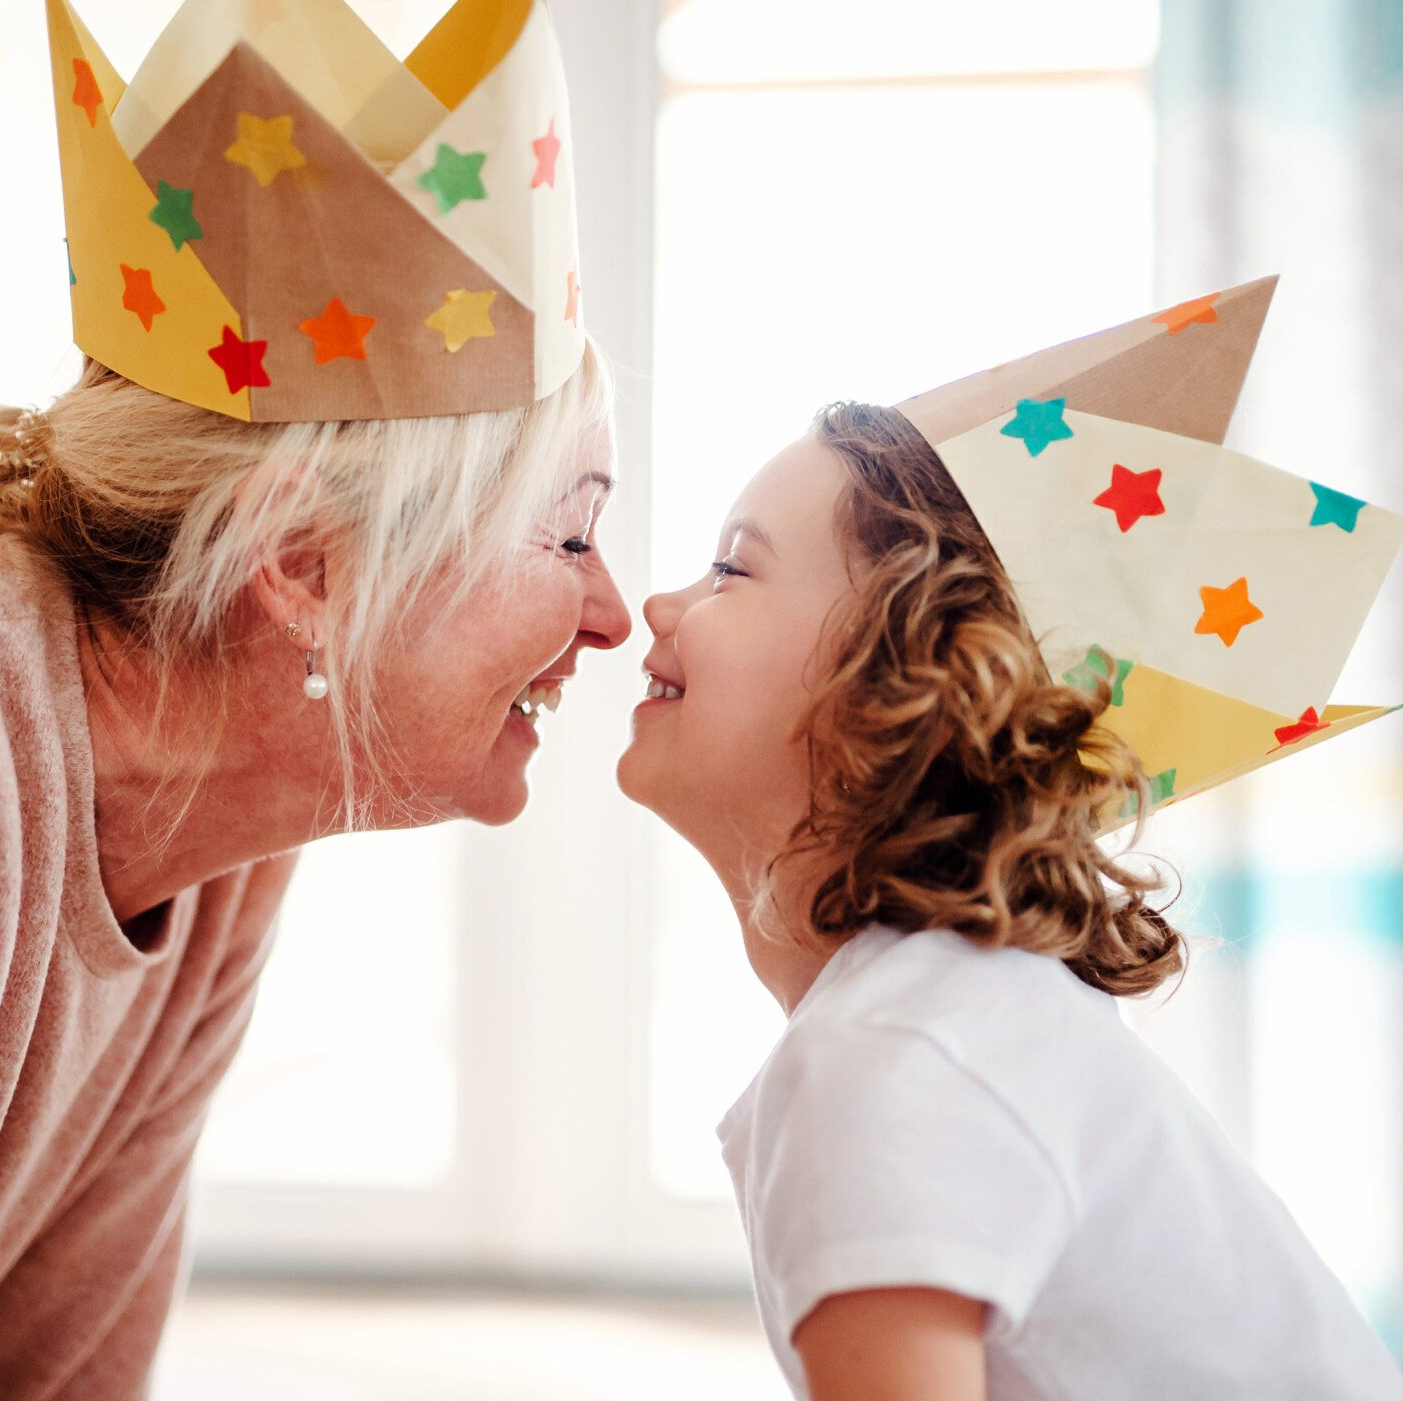 Older woman and child rubbing noses in birthday hats